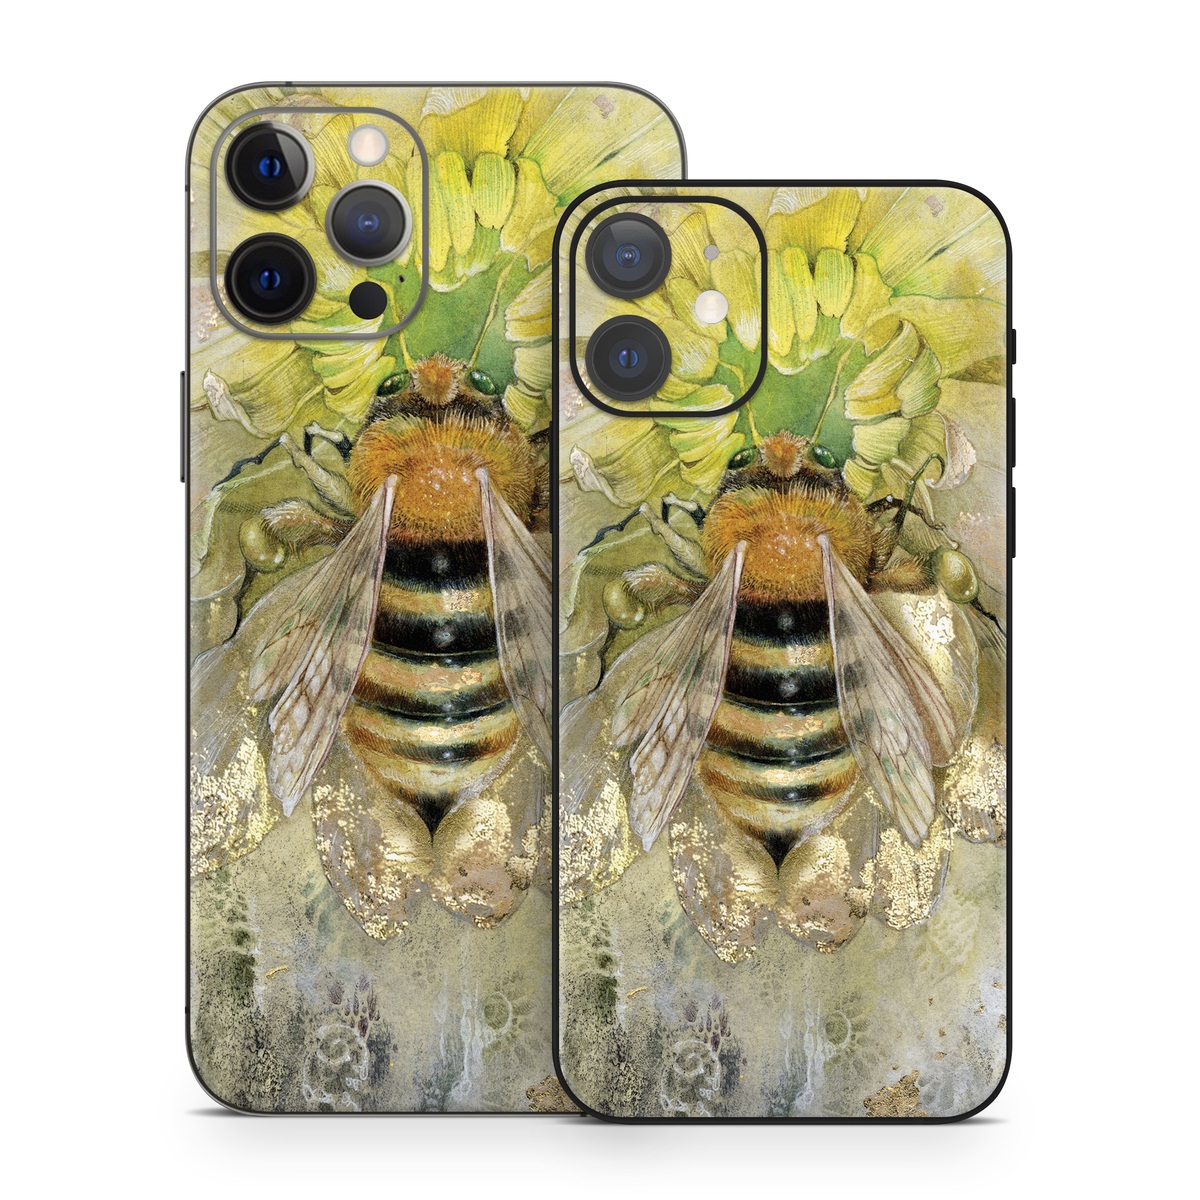 iPhone 12 Series Skin design of Honeybee, Insect, Bee, Membrane-winged insect, Invertebrate, Pest, Watercolor paint, Pollinator, Illustration, Organism, with yellow, orange, black, green, gray, pink colors